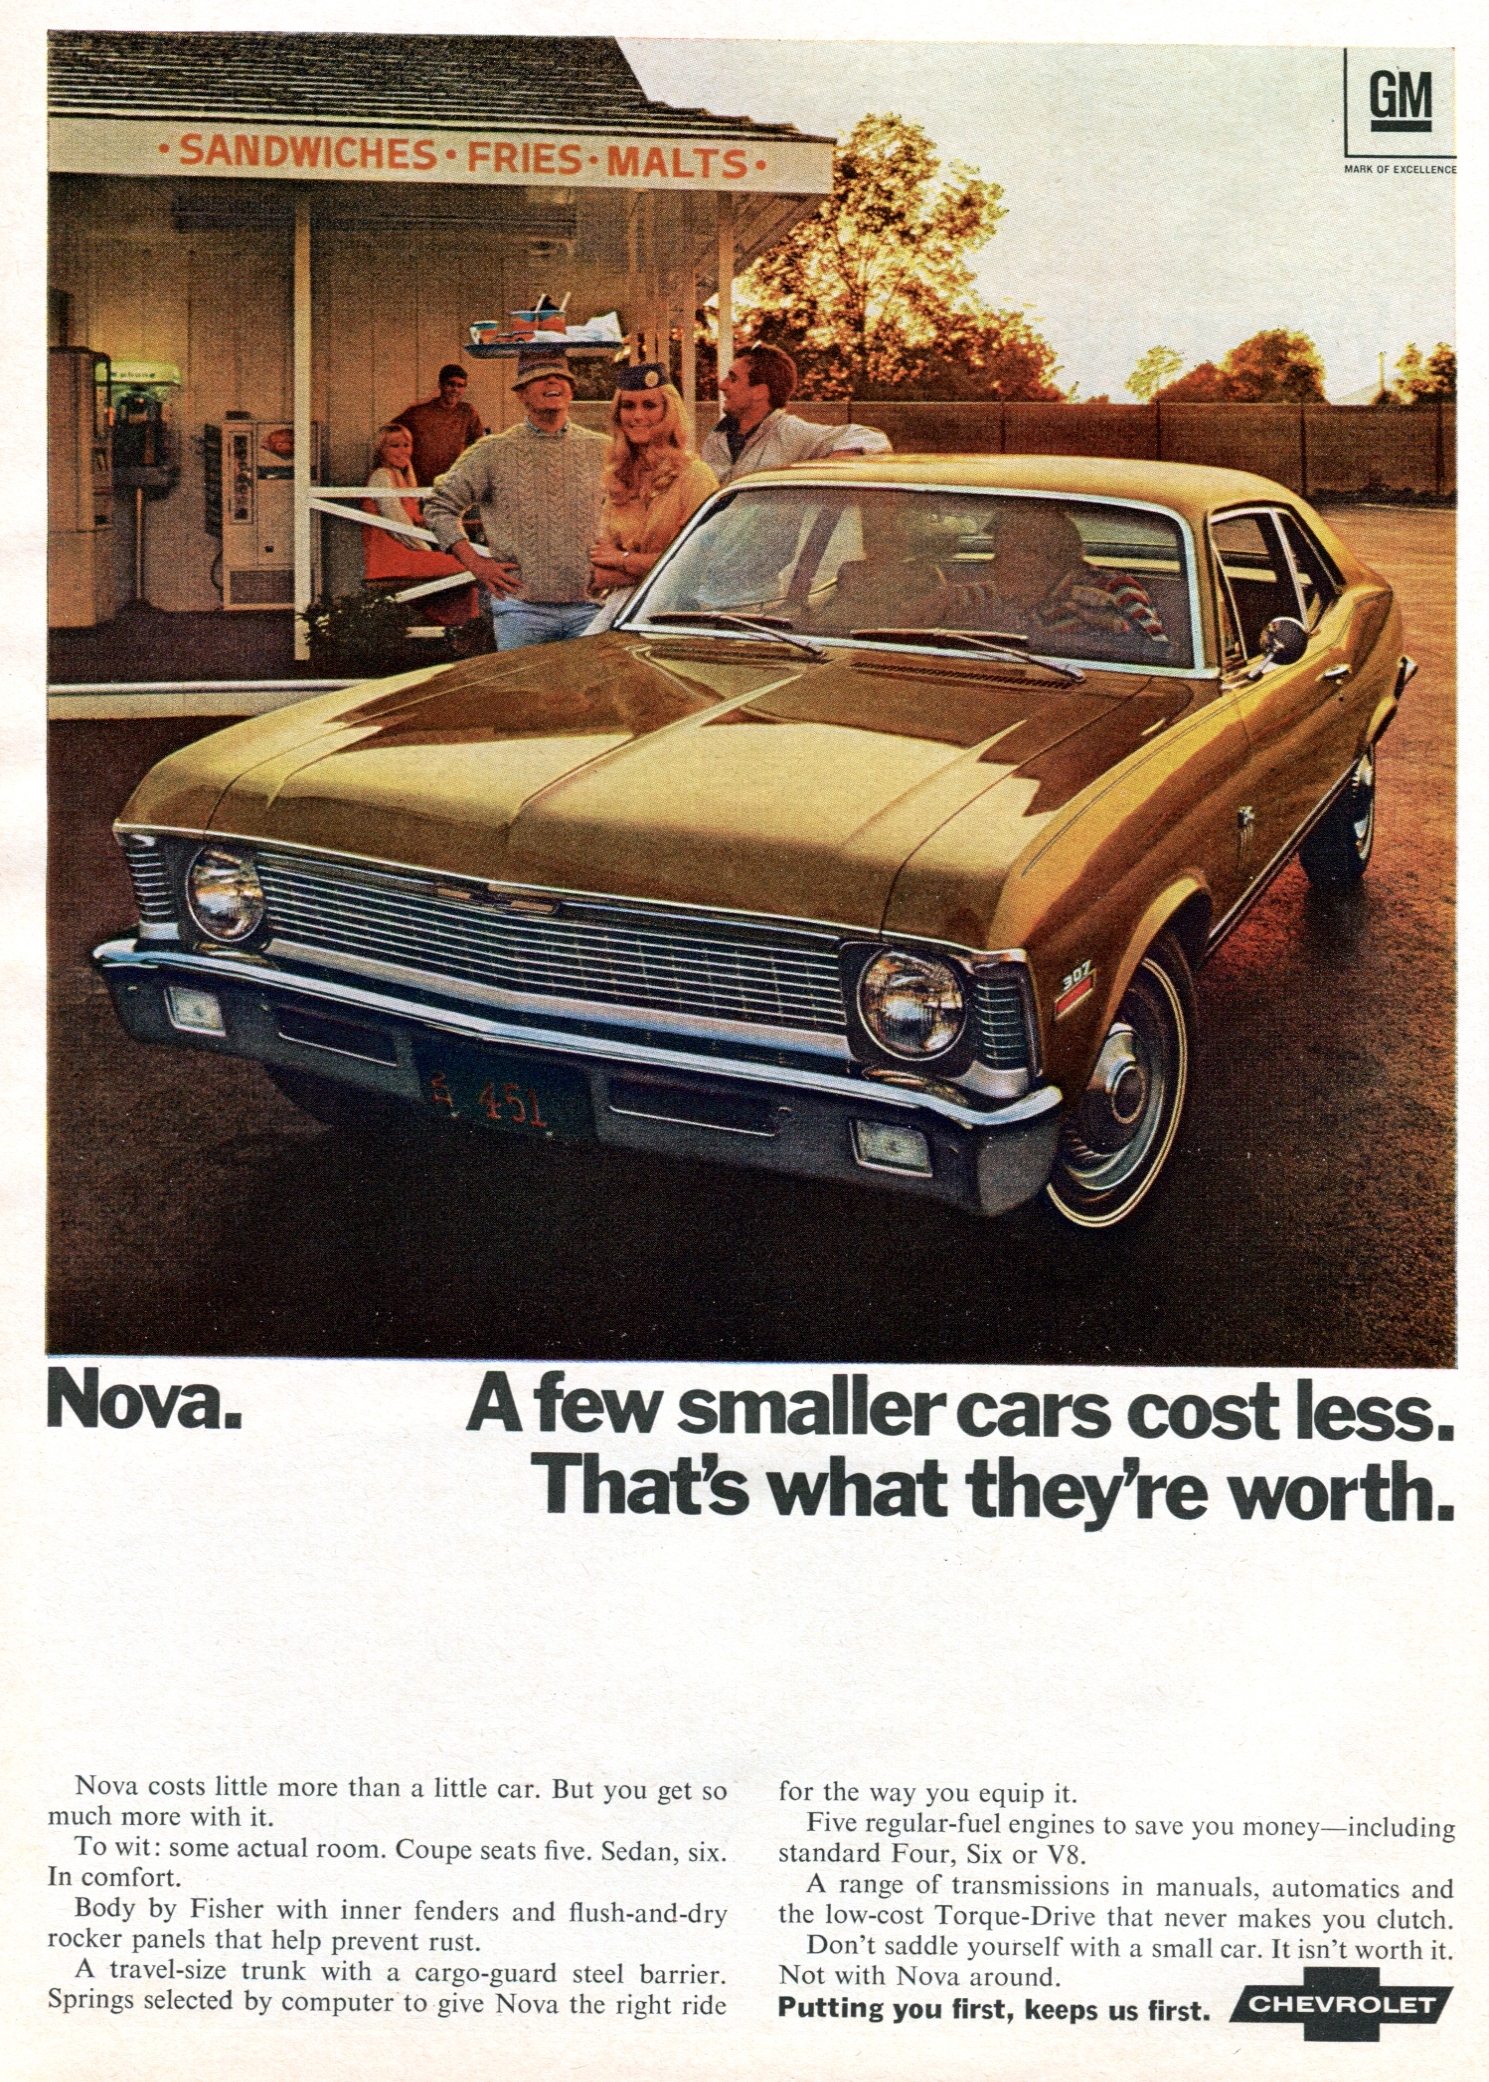 an ad for car sales featuring the new motor